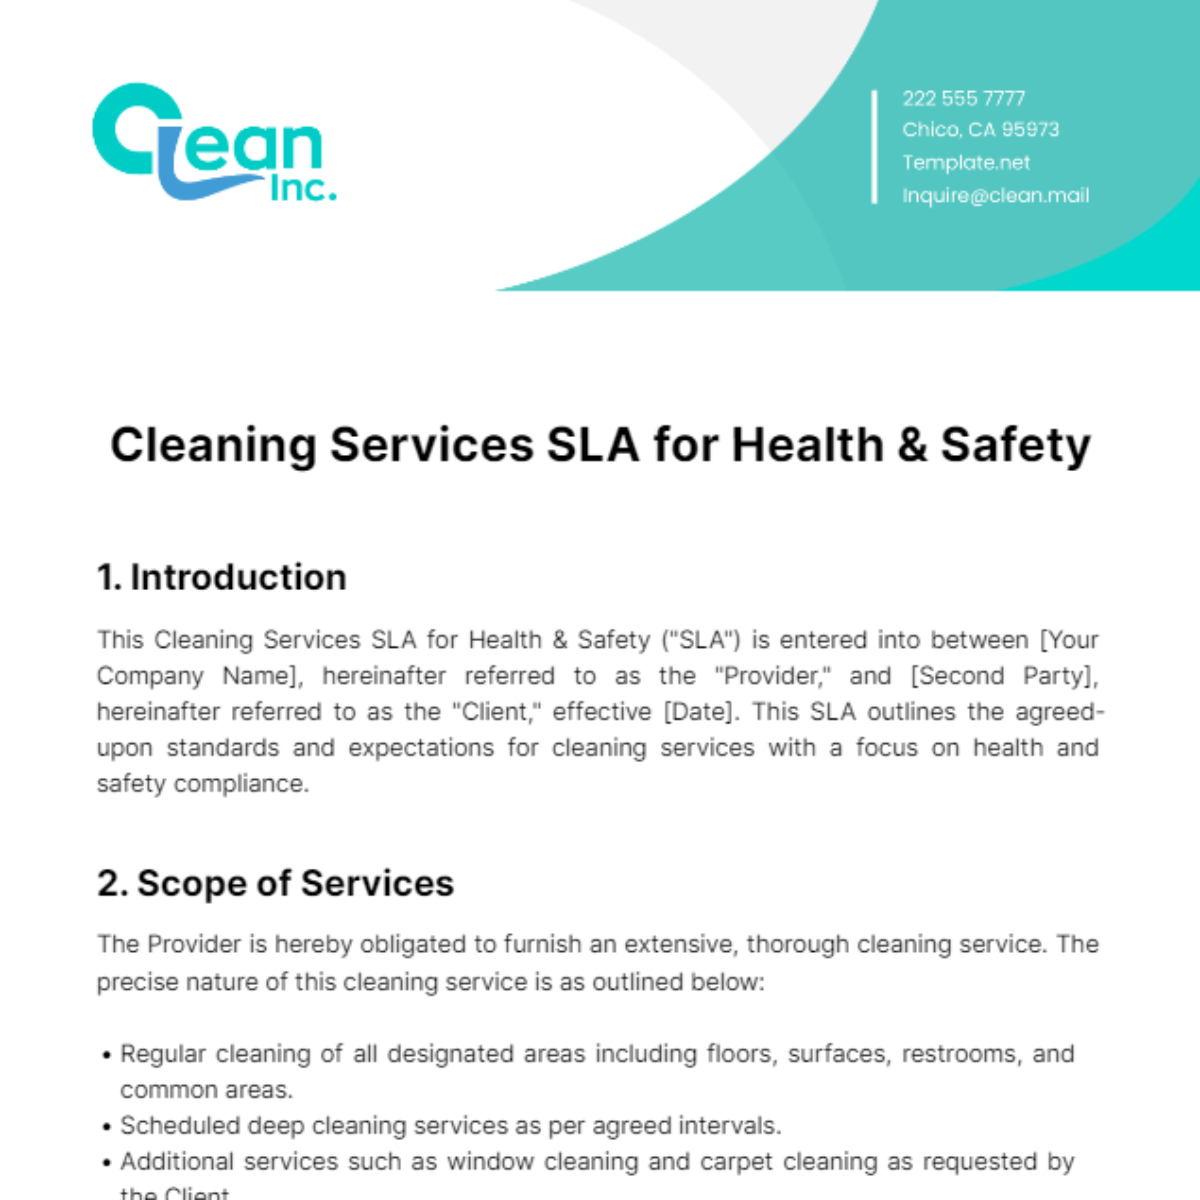 Free Cleaning Services SLA for Health & Safety Template